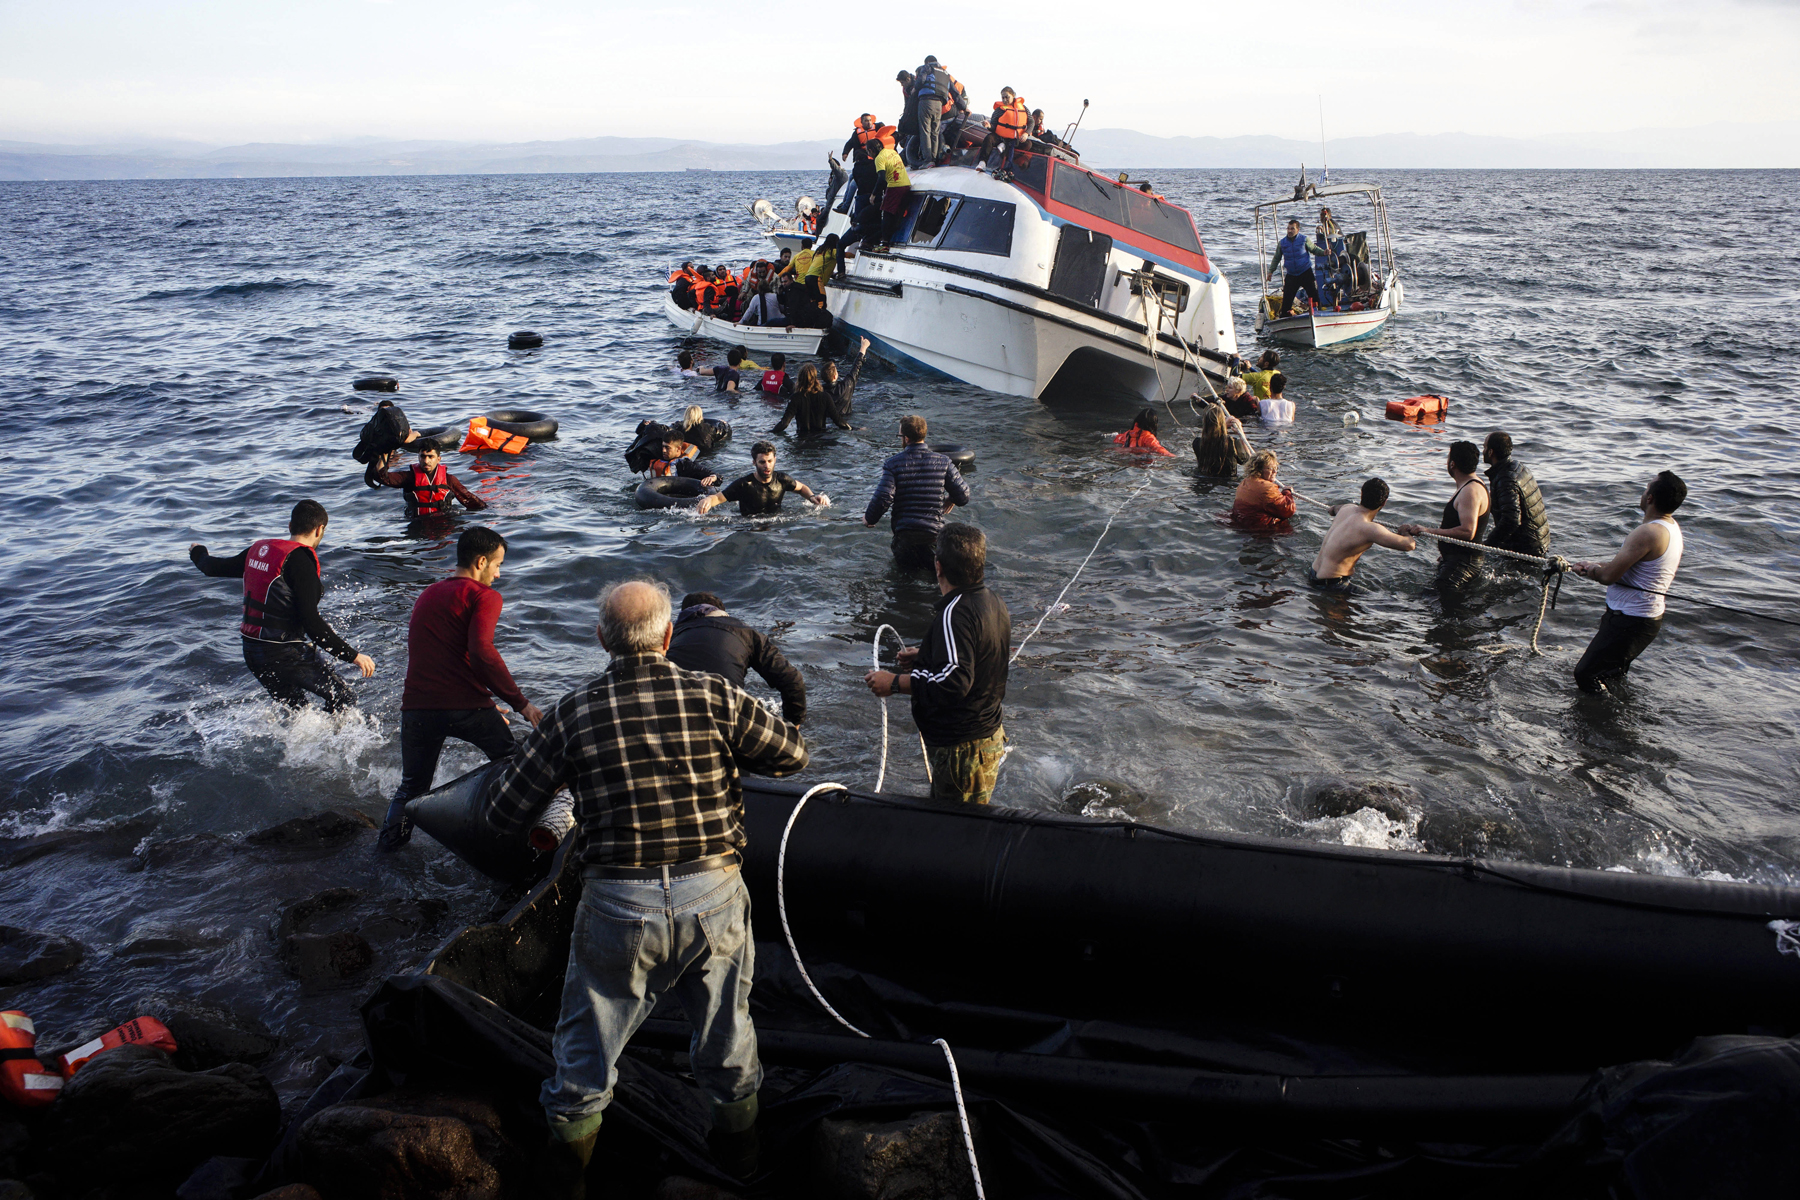 Volunteers and local residents help refugees and migrants disembark from a small vessel after their arrival in Skala Sykaminias on the northeastern Greek island of Lesbos on Friday, Oct. 30, 2015. Greek authorities say a number of people have died near other islands after two boats carrying migrants and refugees from Turkey to Greece sank overnight, in the latest deadly incident in the eastern Aegean Sea. (AP Photo/Kostis Ntantamis)